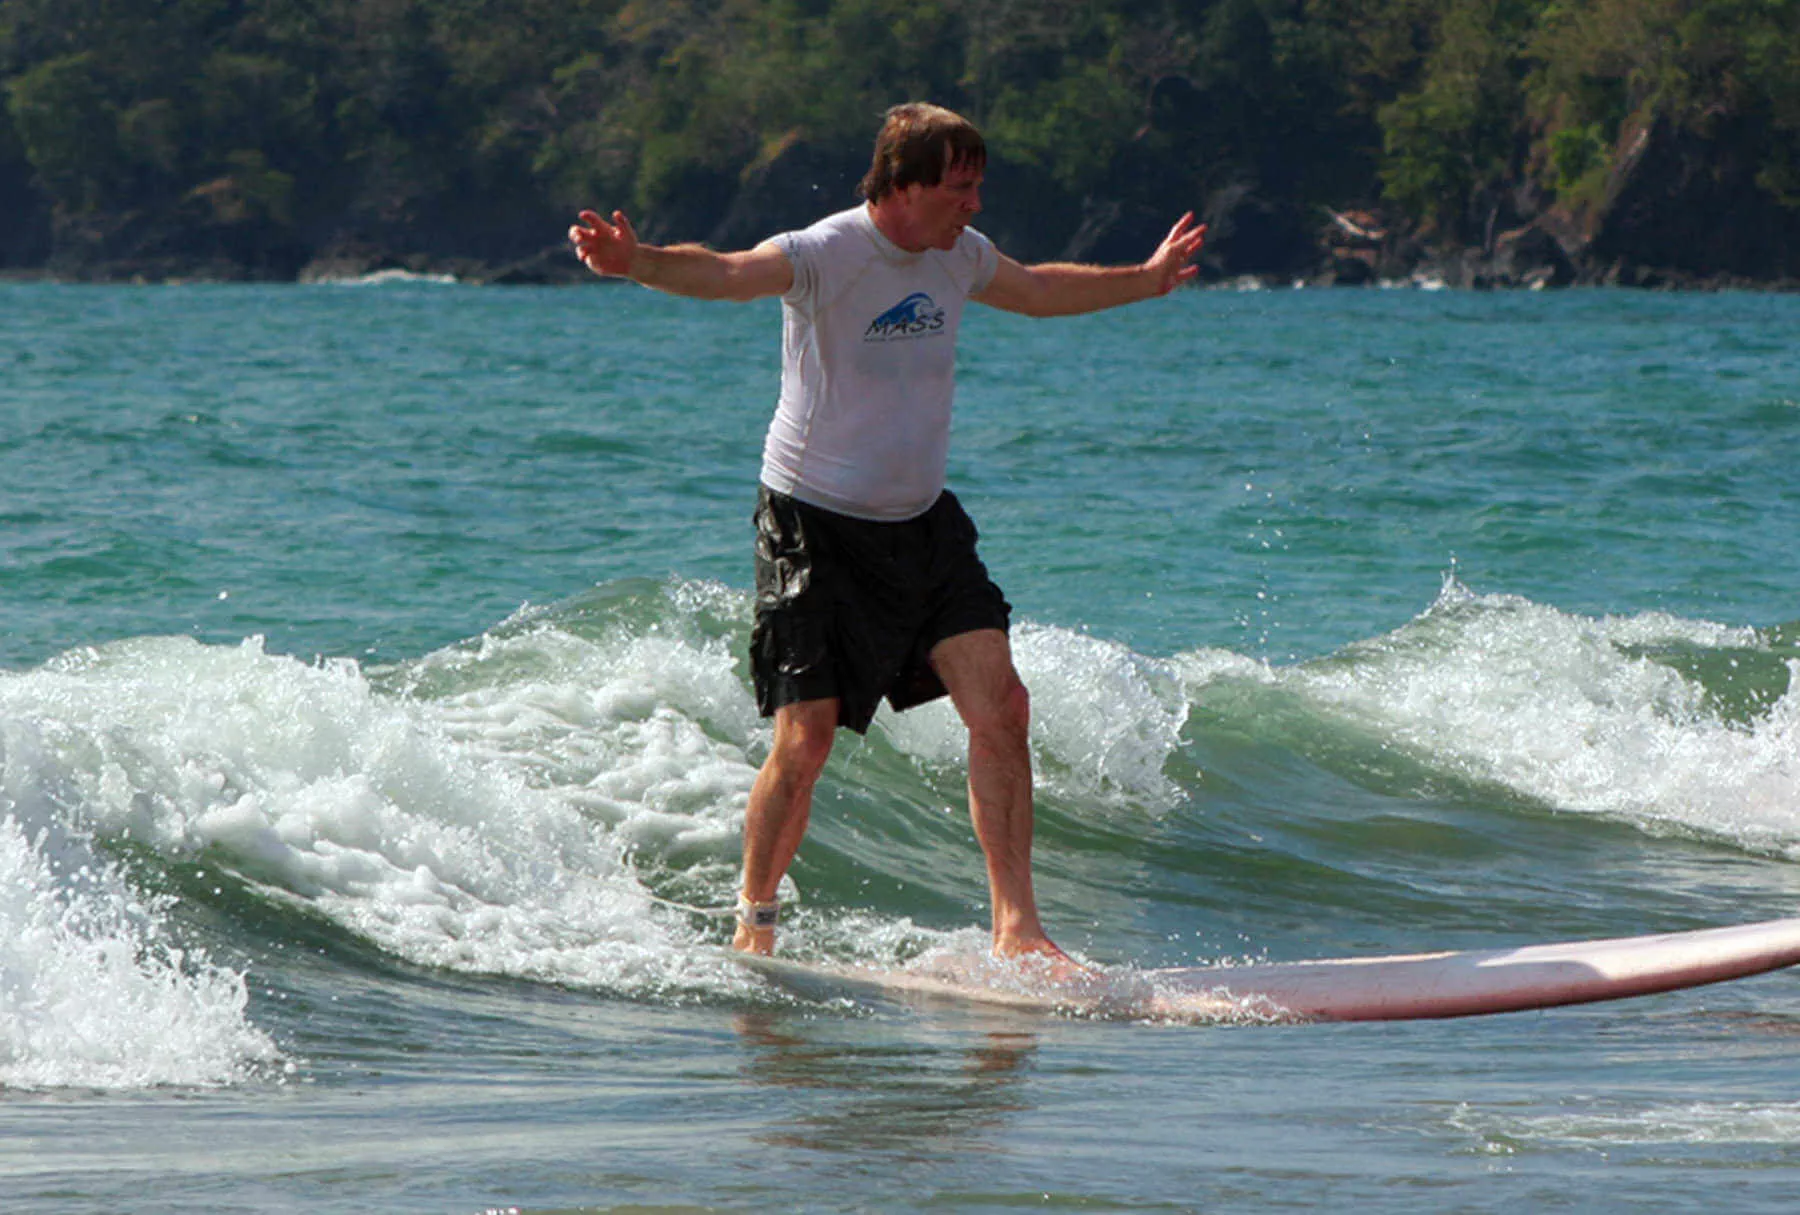 It takes a while, but Rick Steves finally learns how to stand up on a surfboard